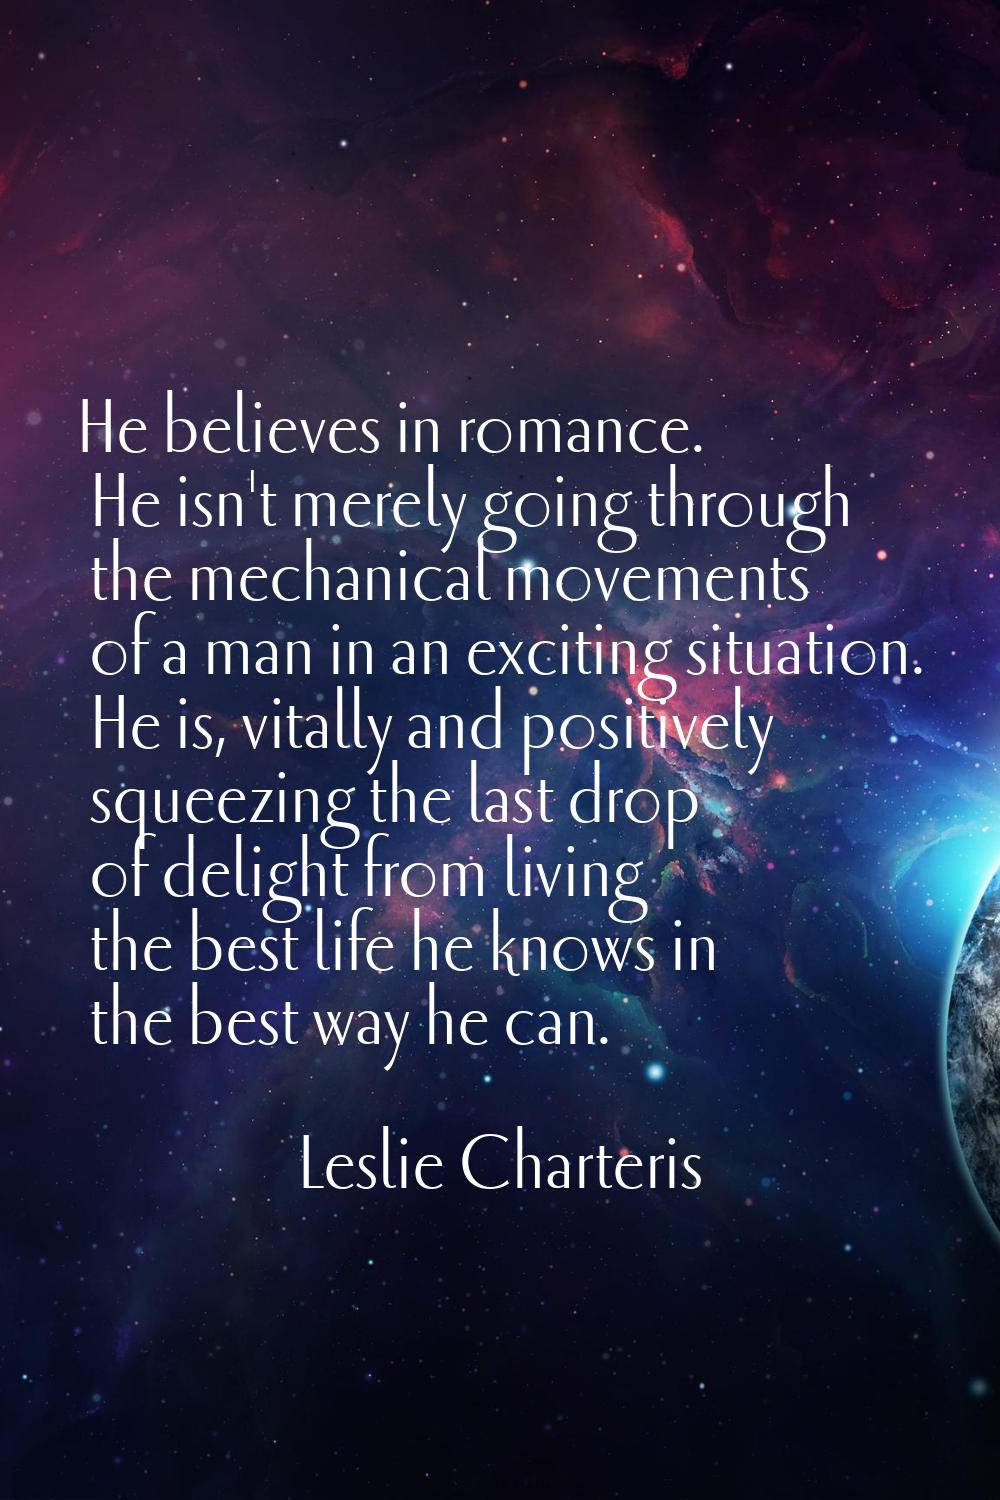 He believes in romance. He isn't merely going through the mechanical movements of a man in an excit